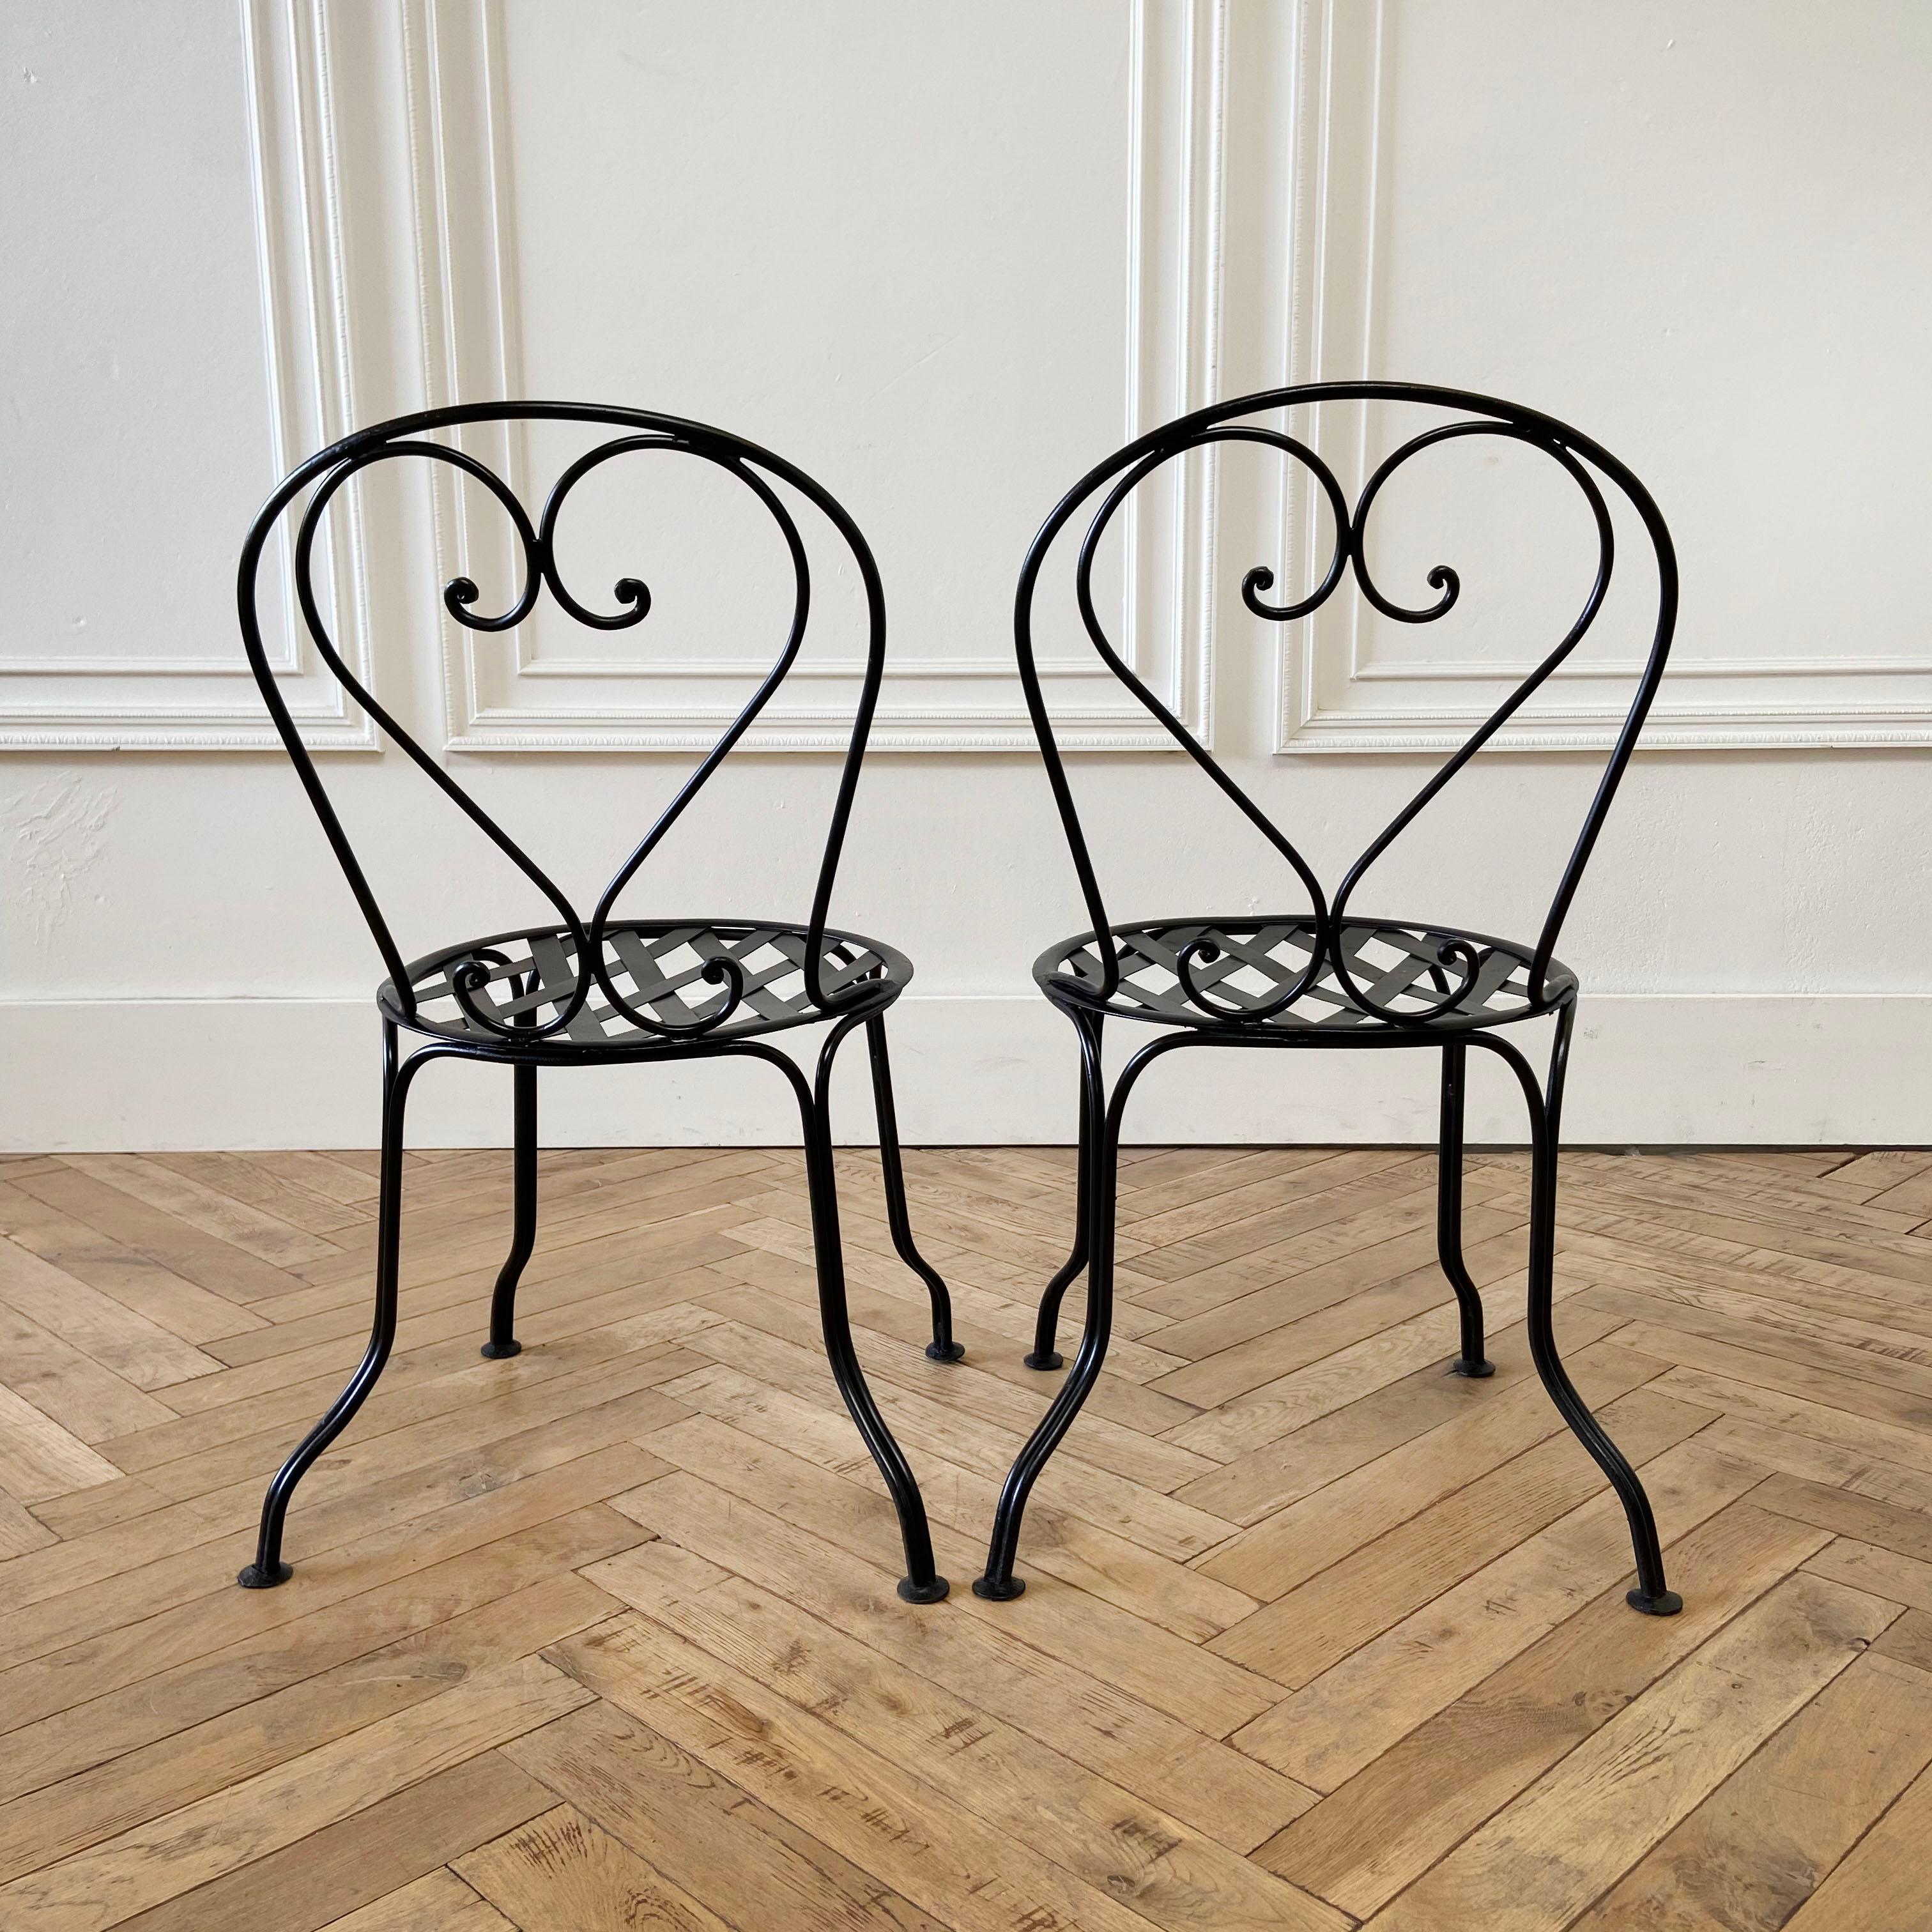 Vintage pair of French style black iron bistro chairs

Measures: 19” W x 19” D x 30.5” H
Seat height: 16”
Seat depth: 15”.